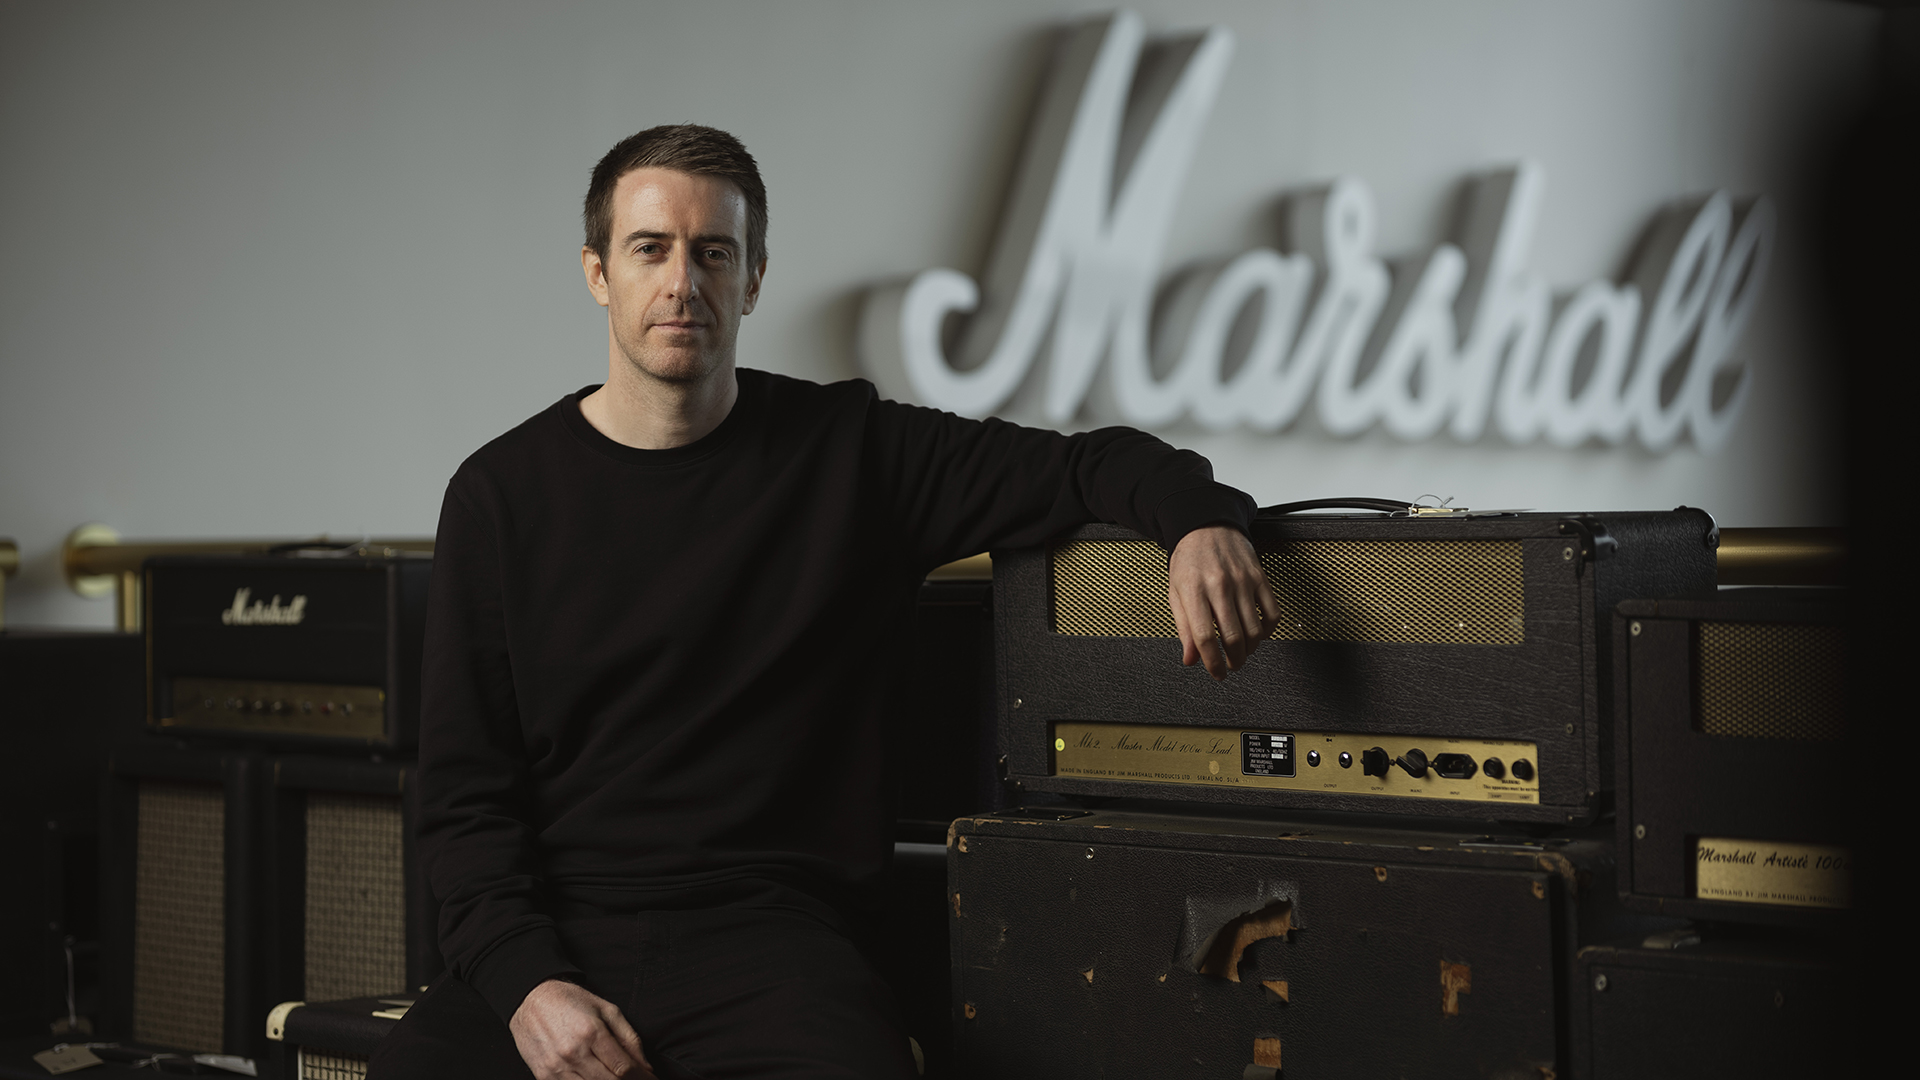 “If we lose the amp-making industry, we lose the entire lot. We’ve bought to pass support and level to the guitarist neighborhood that Marshall in actuality cares about them”: From digital amps to modelers and mods – Marshall’s current CEO has enormous plans to take hang of support guitar gamers